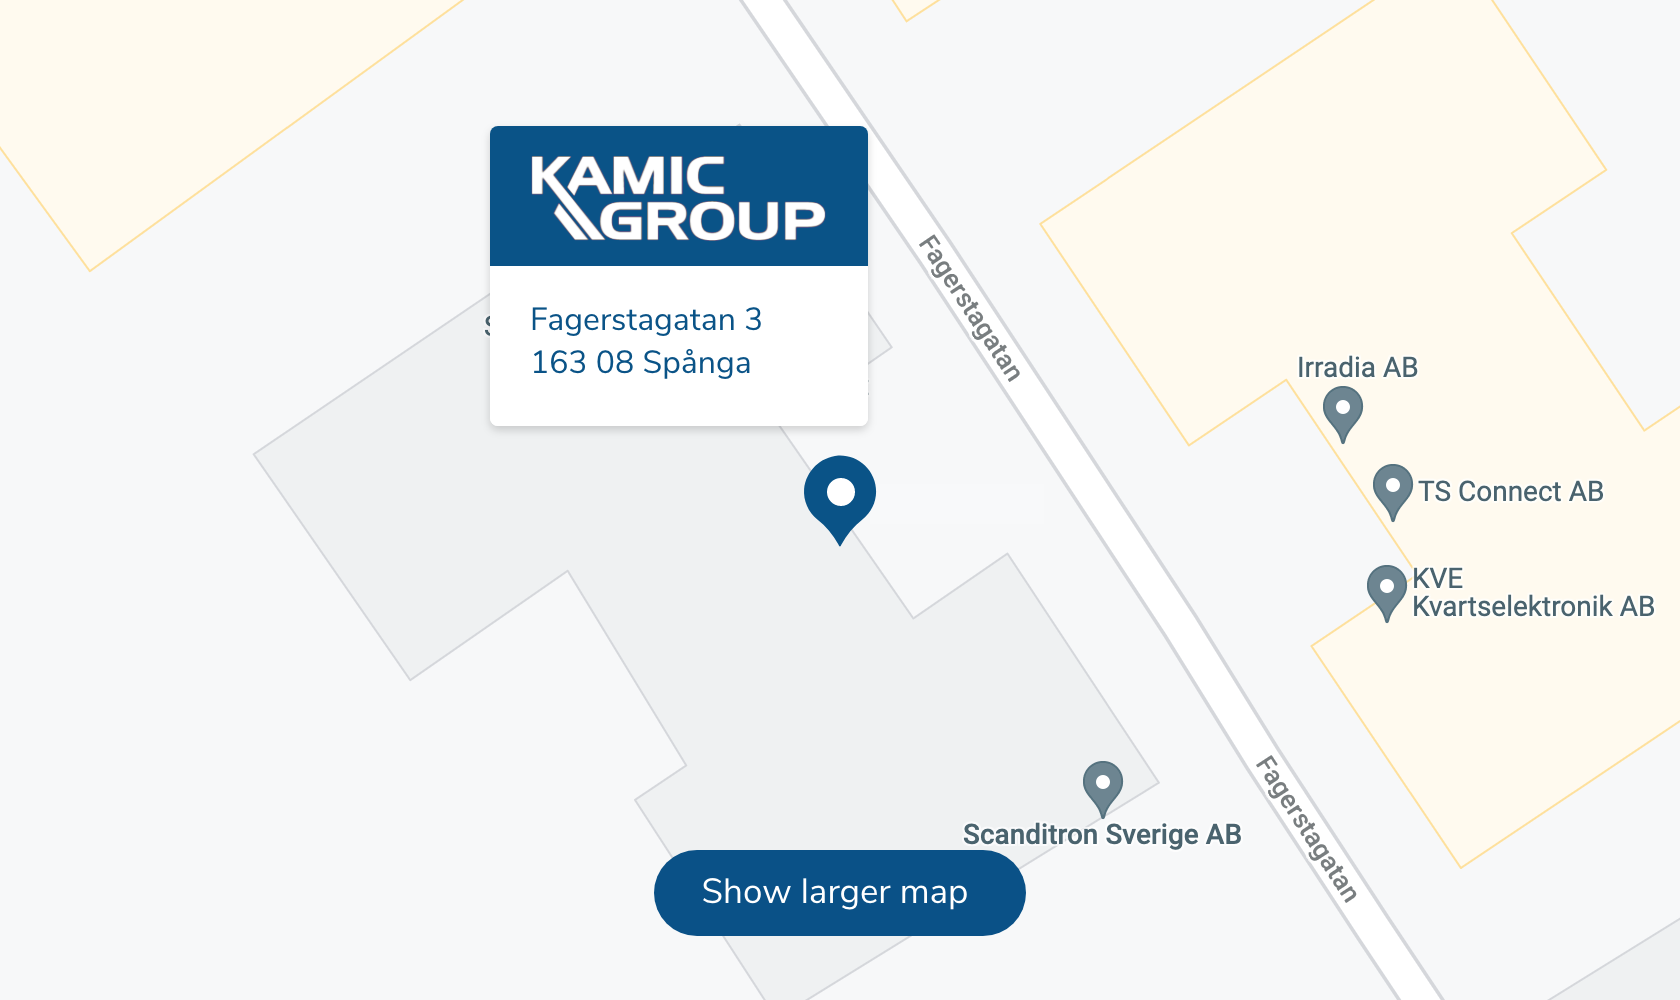 Map showing the geographical position of KAMIC Group